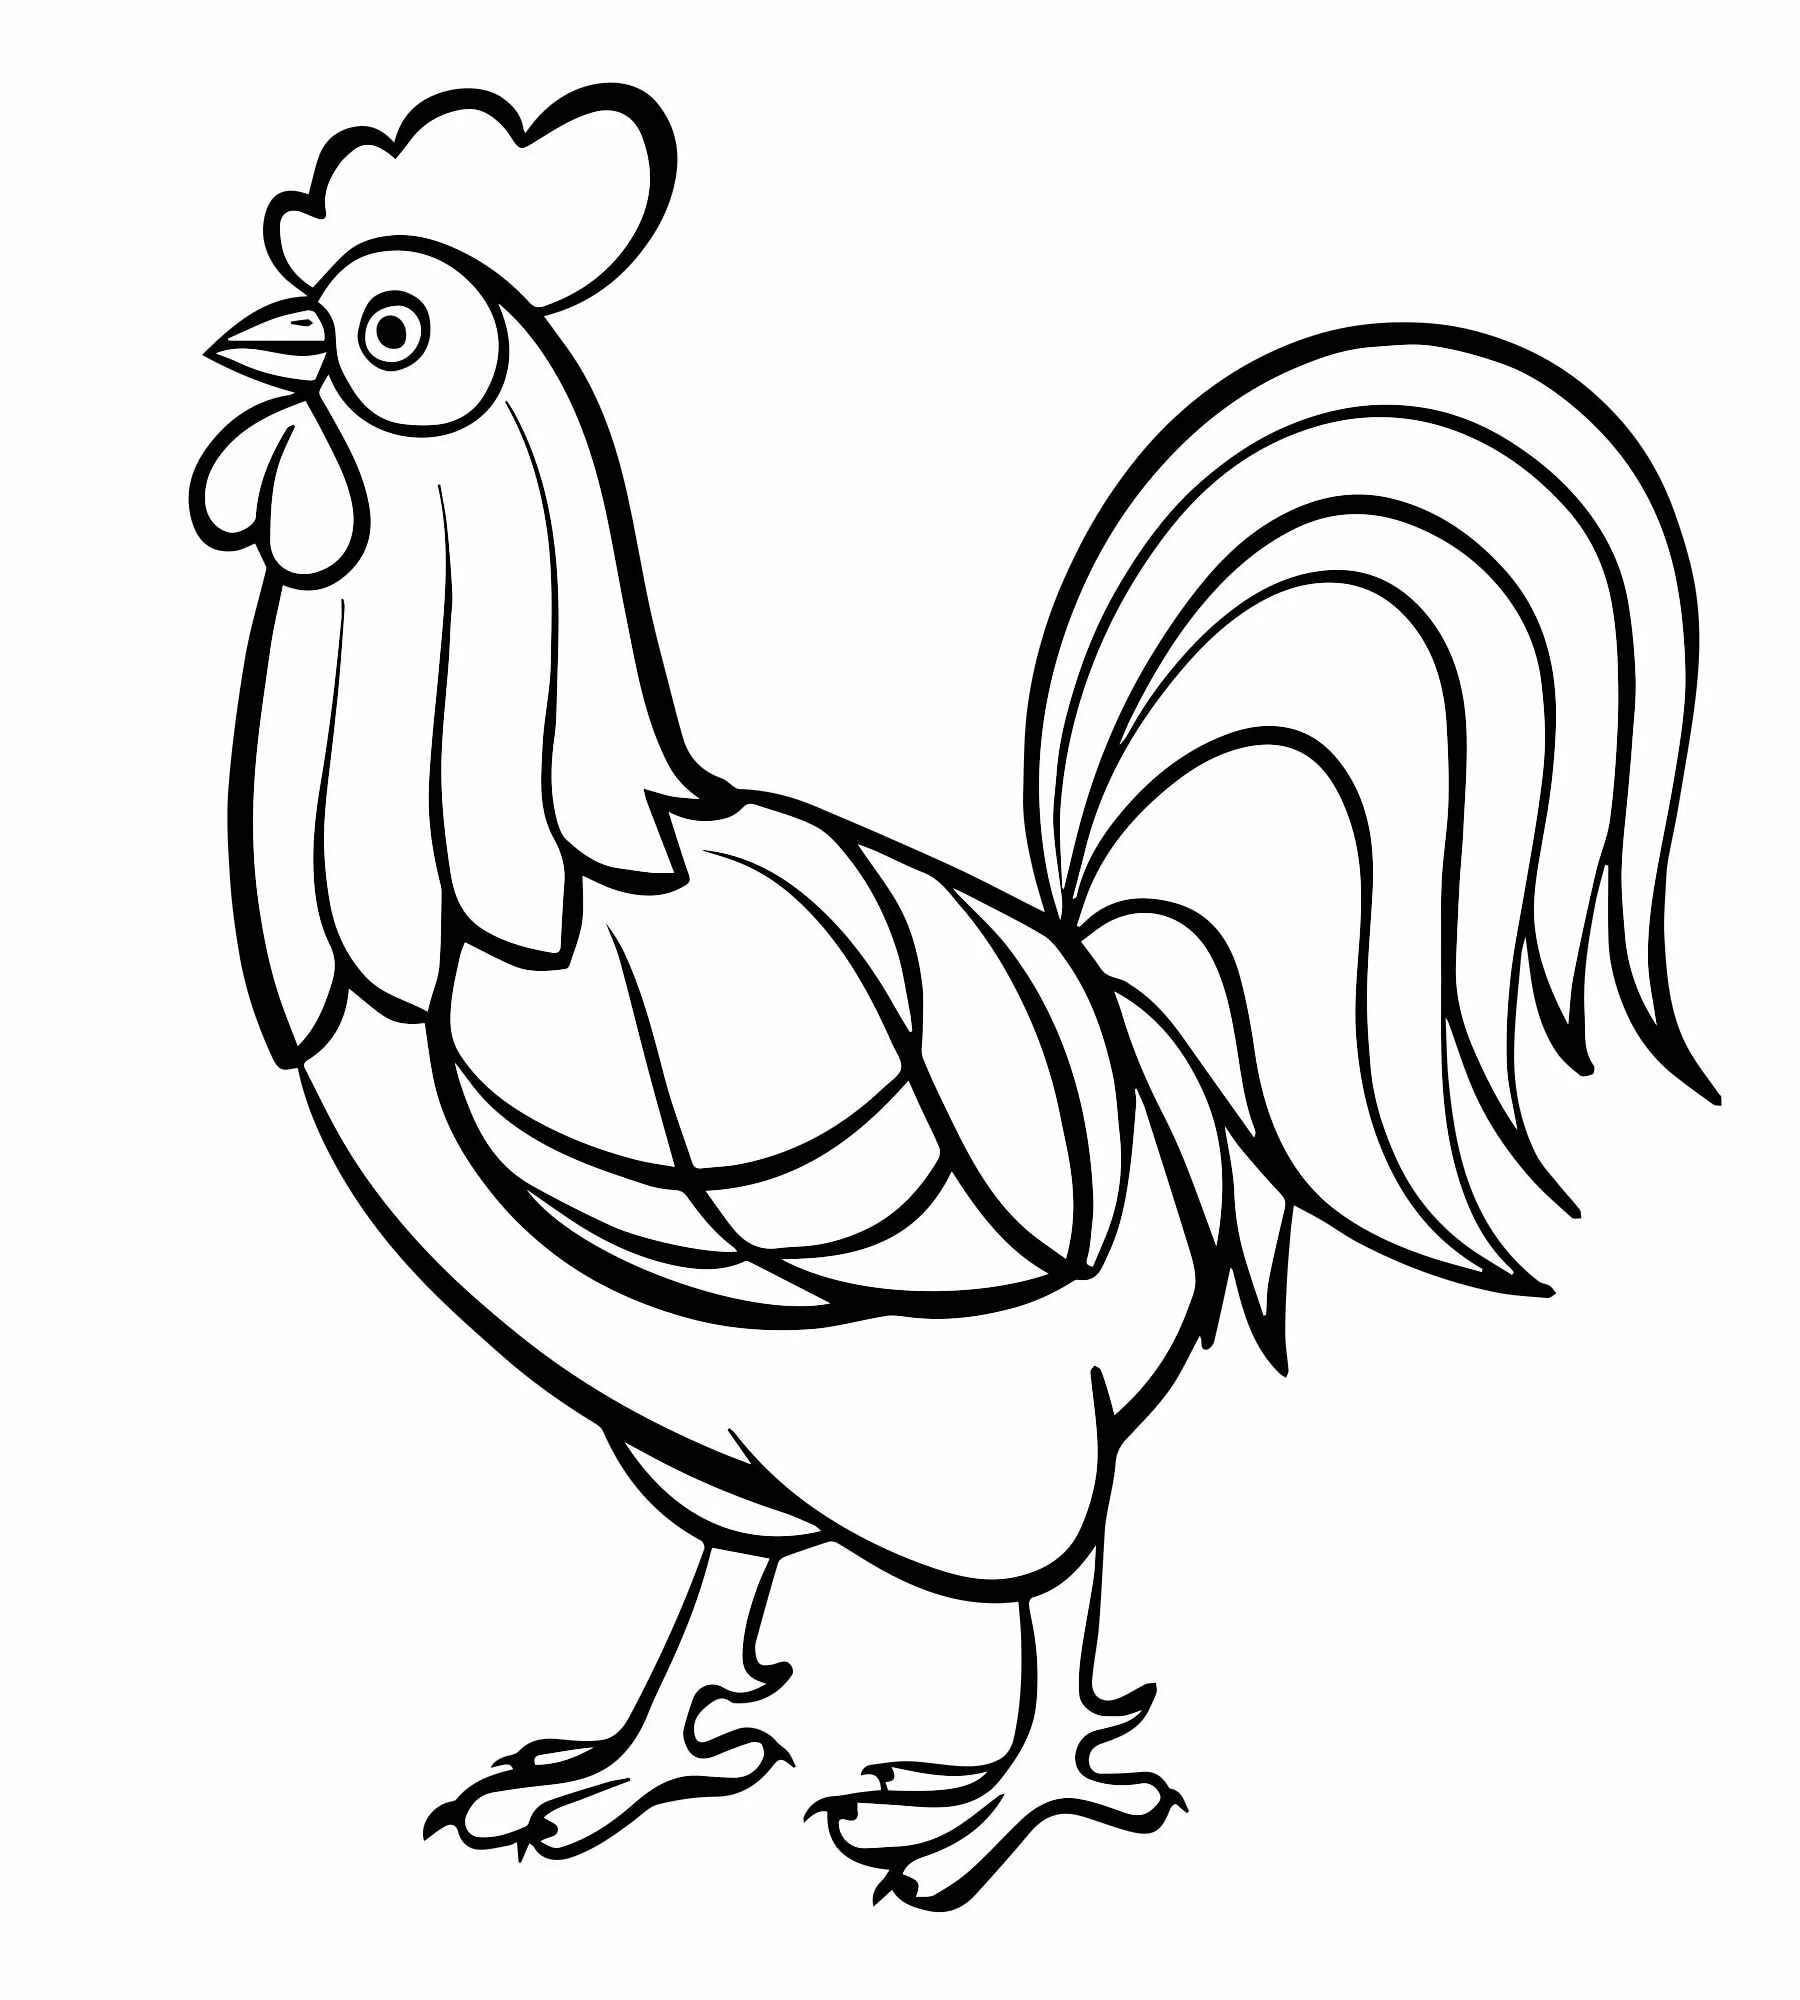 Live rooster coloring pages for kids